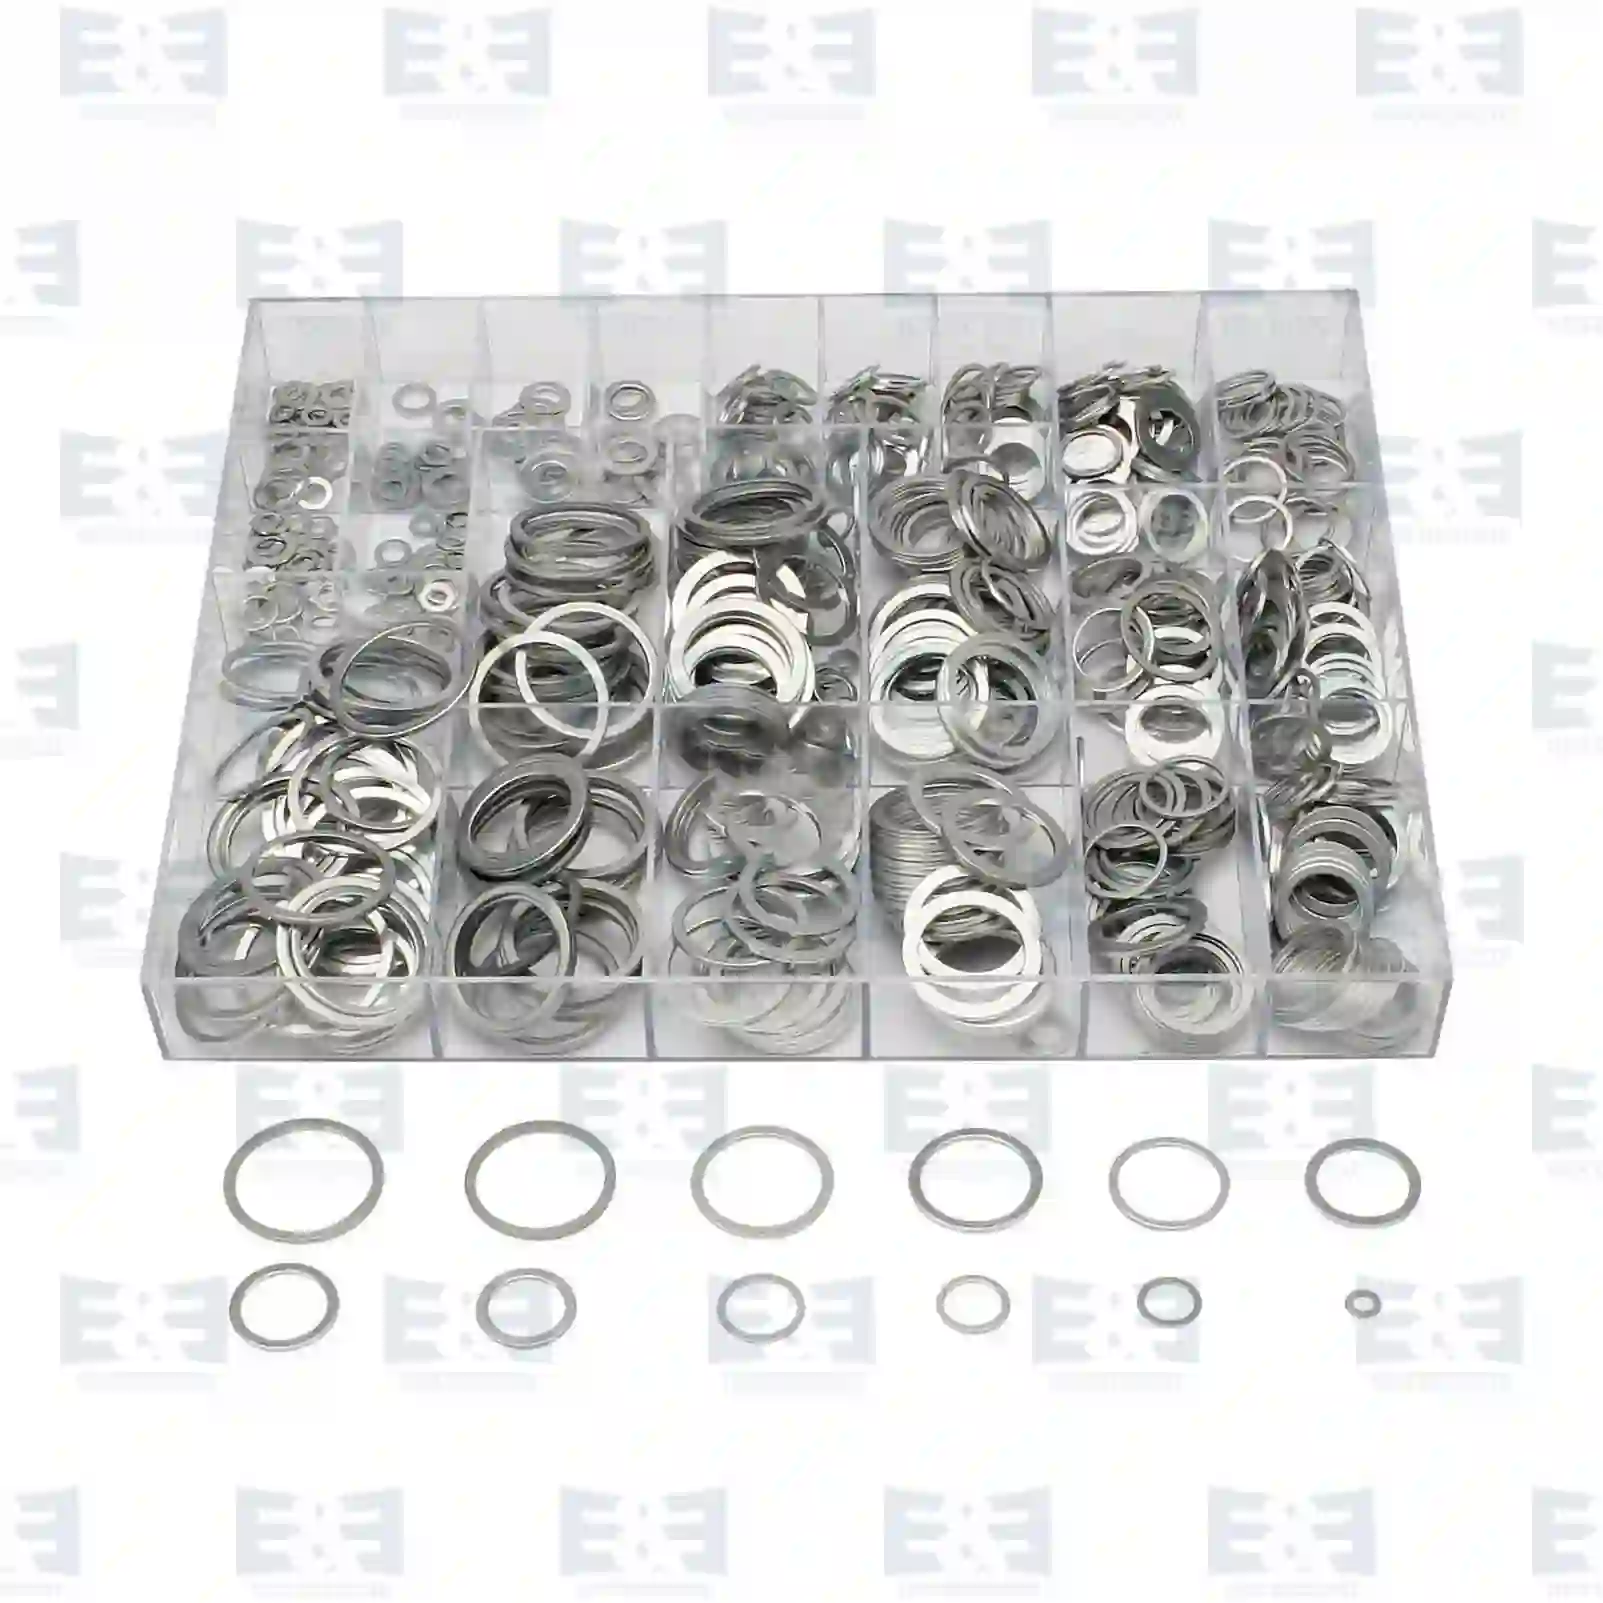  Seal ring assortment || E&E Truck Spare Parts | Truck Spare Parts, Auotomotive Spare Parts